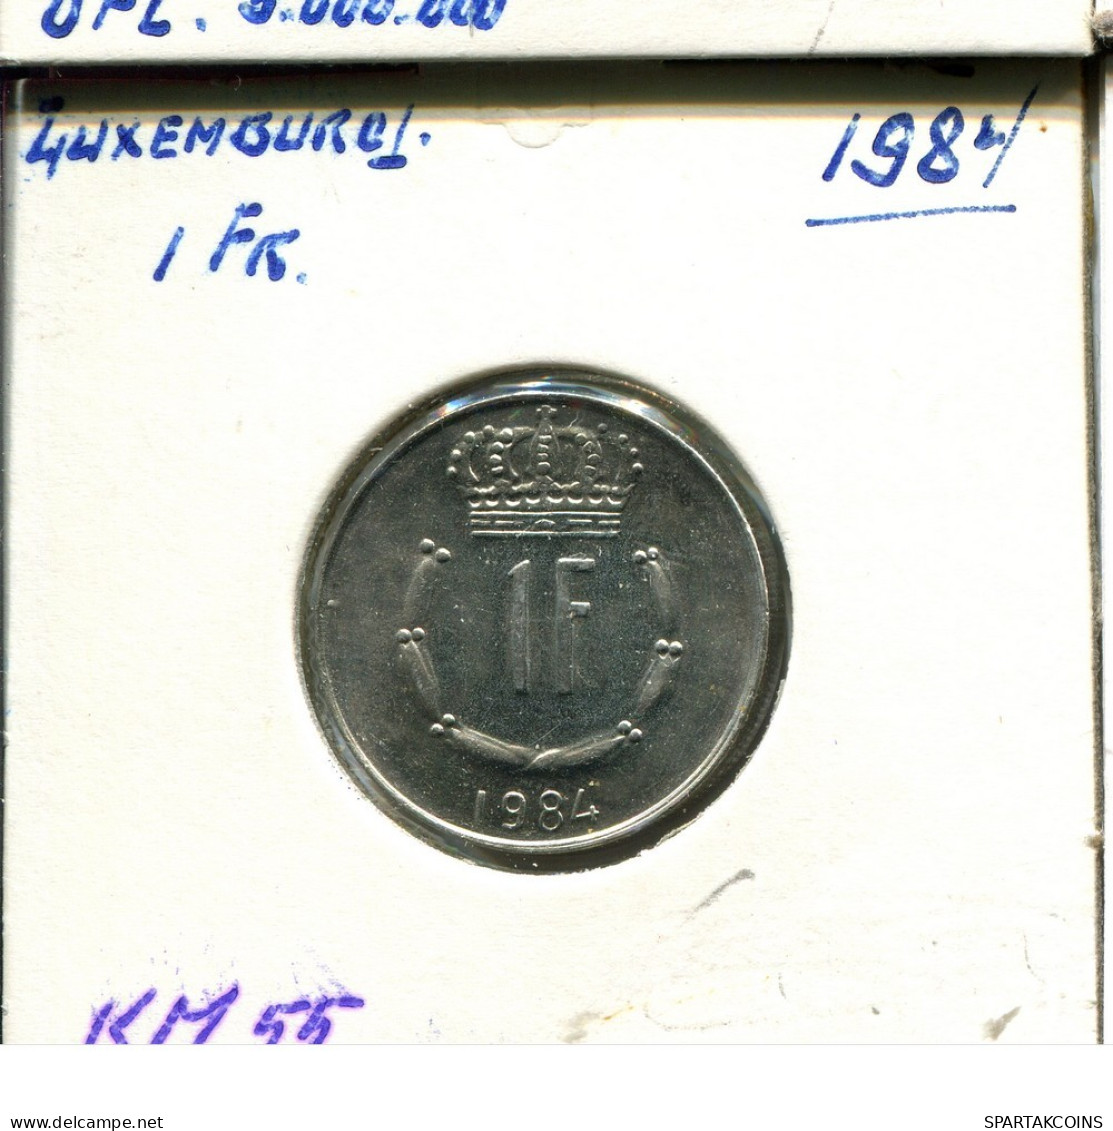 1 FRANC 1984 LUXEMBOURG Coin #AT220.U.A - Luxemburgo